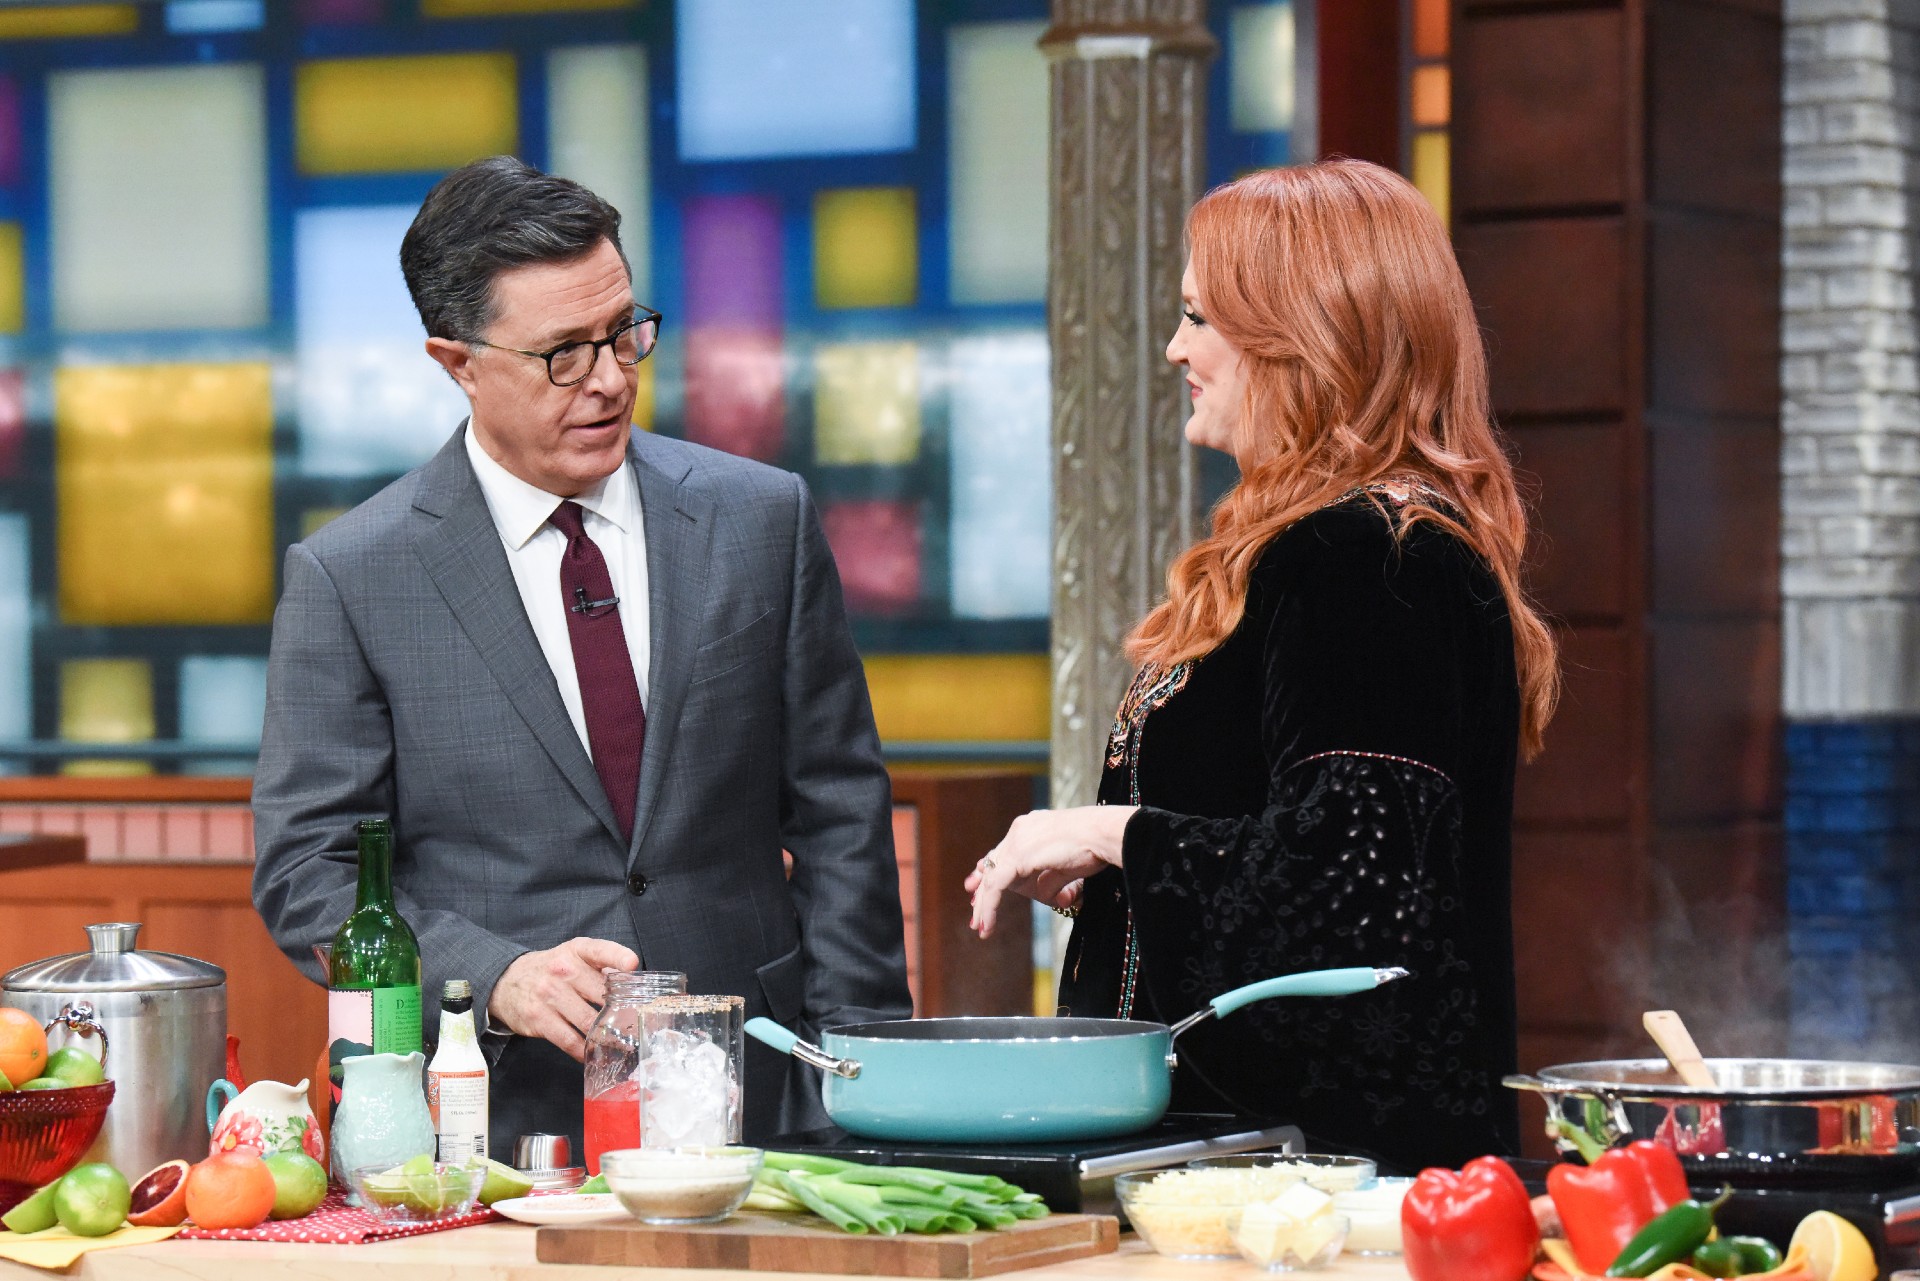 Stephen Colbert and Ree Drummond during a cooking demonstration